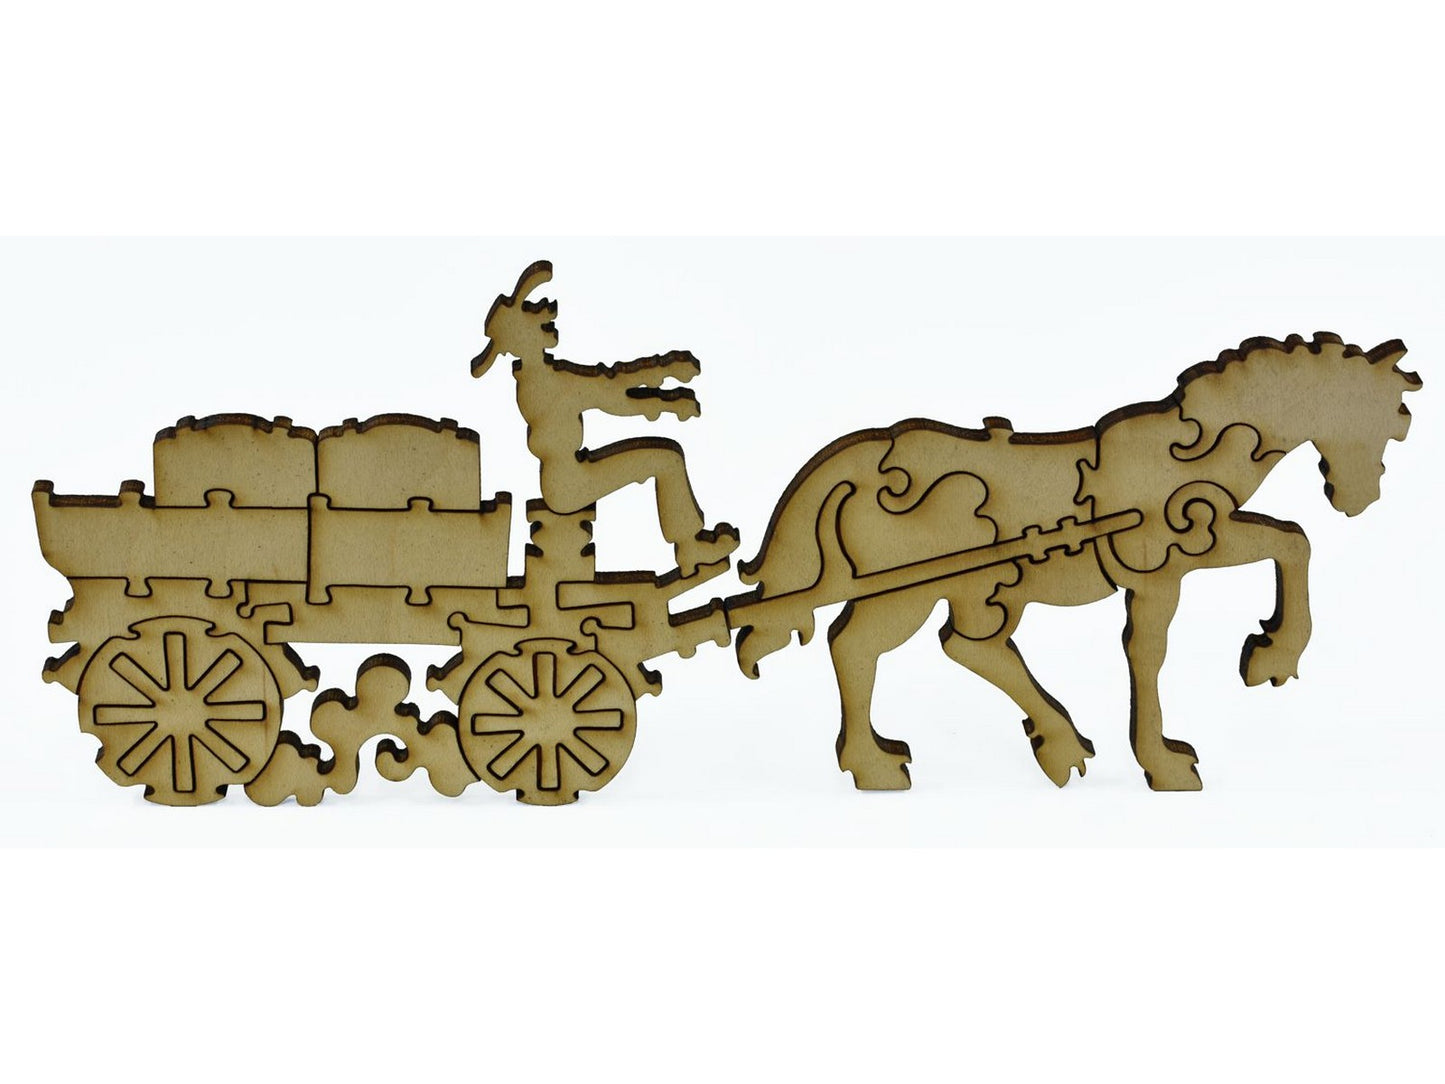 A closeup of pieces showing a man riding on a horse drawn carriage.